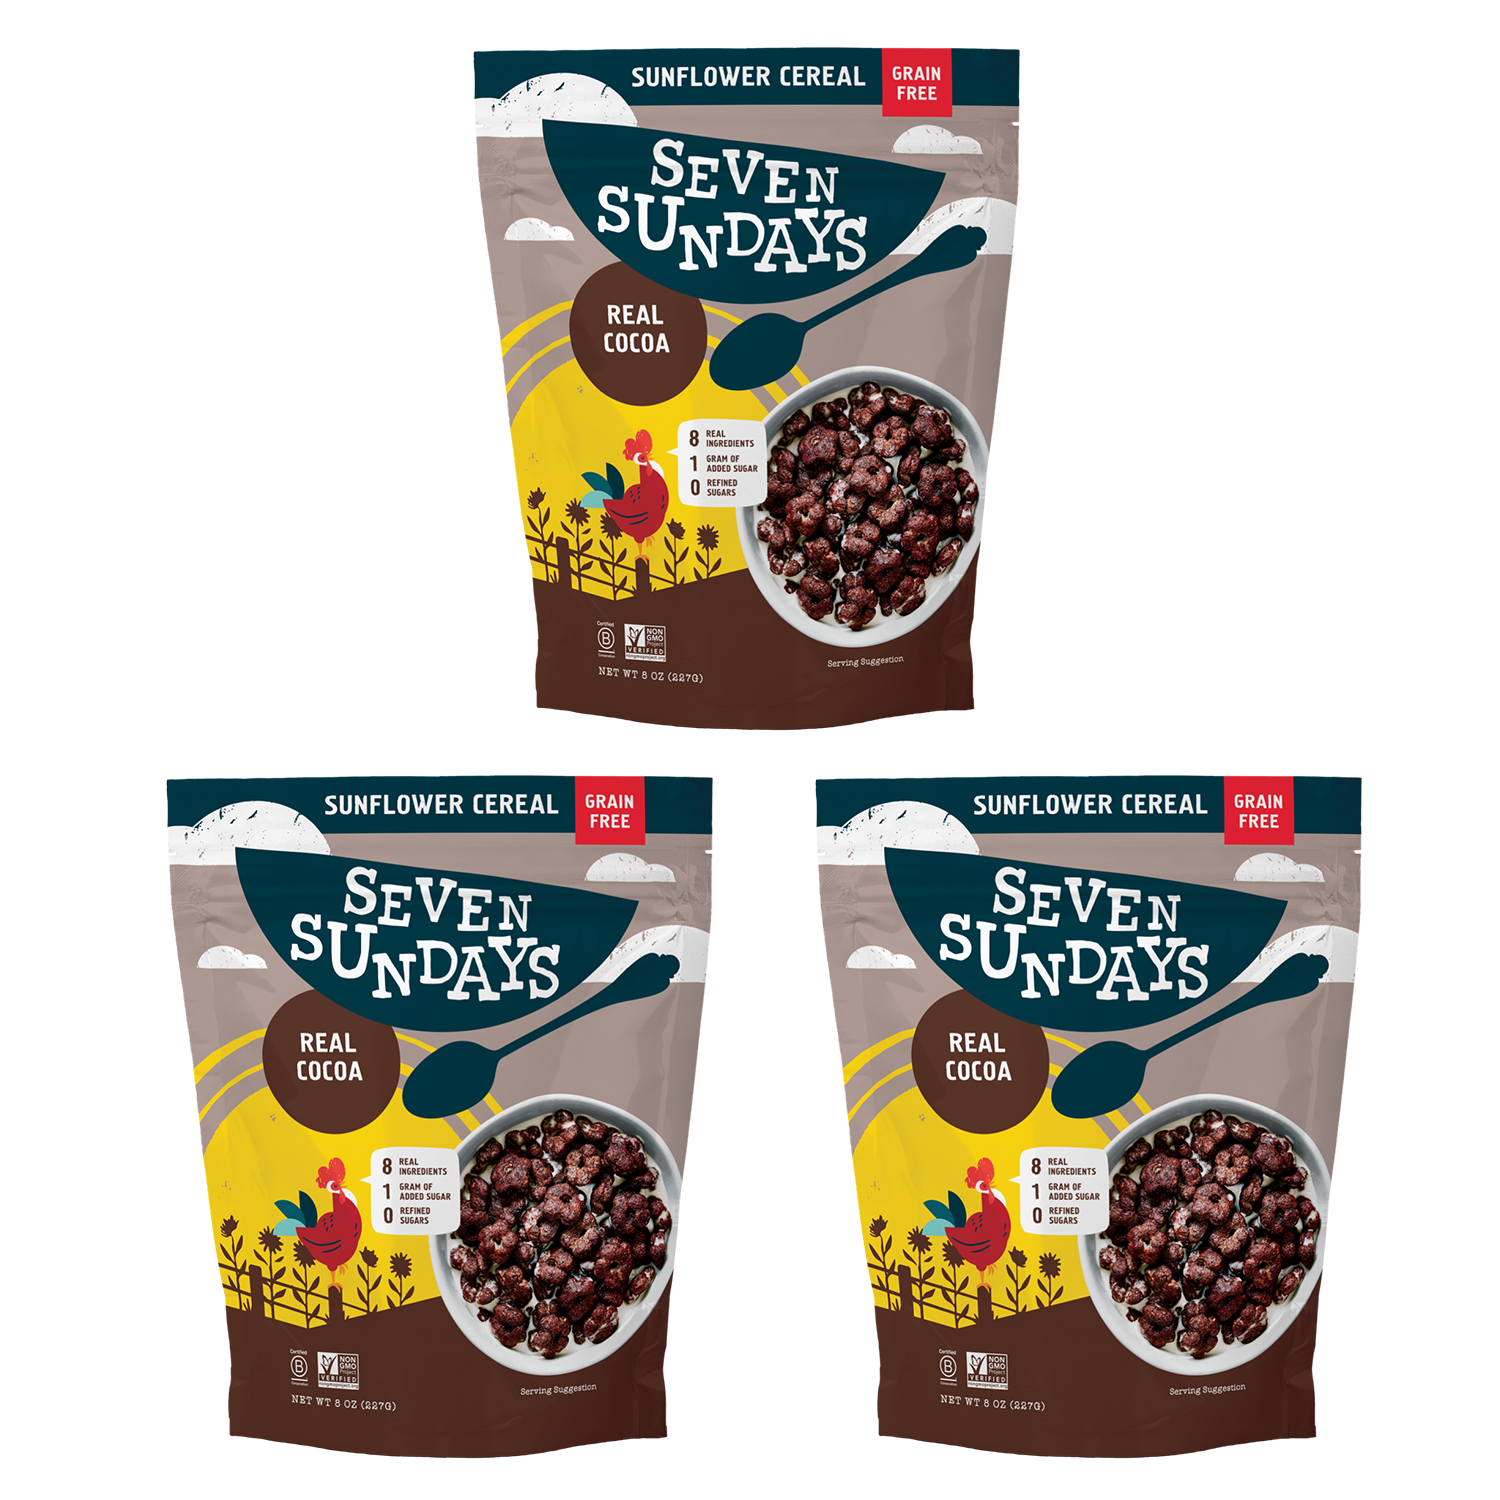 Real Cocoa Sunflower Cereal